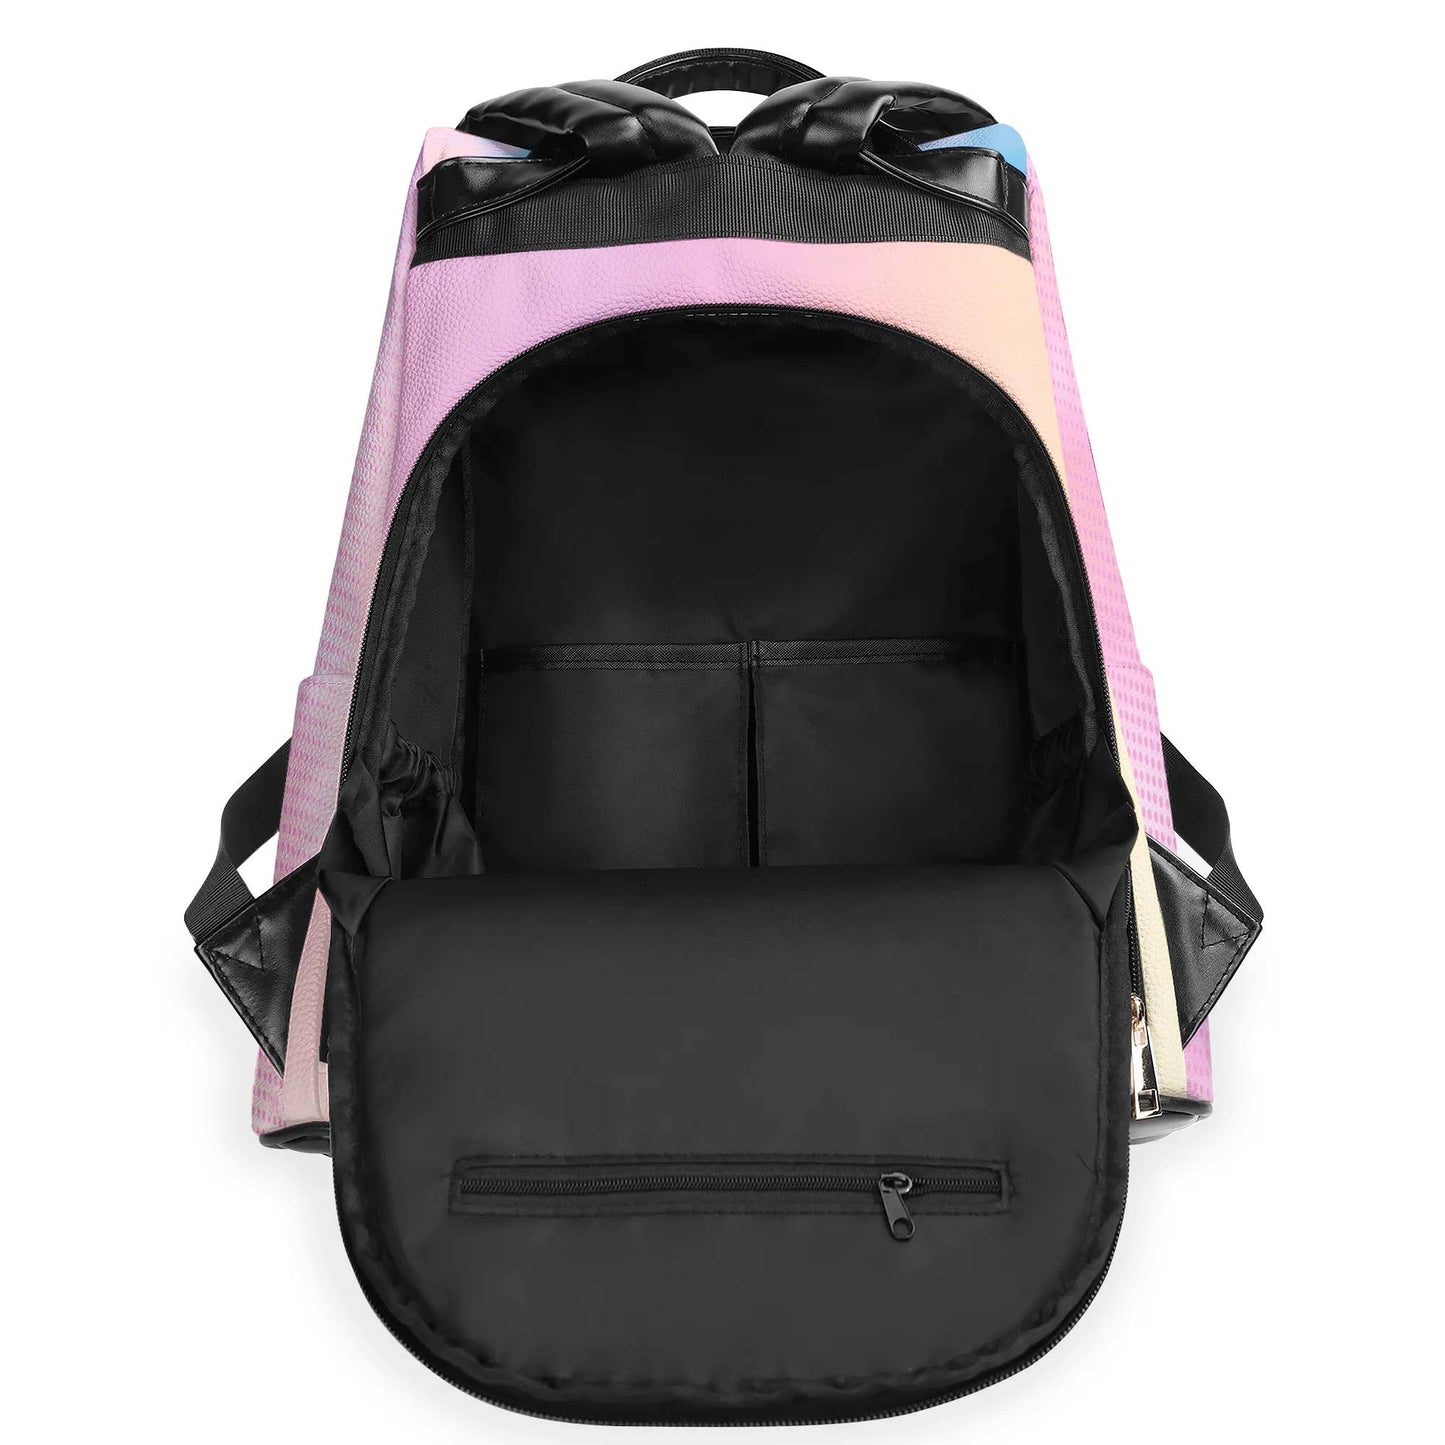 I Can Do This With A Broken Heart - Personalized Leather BackPack - BP_FN19